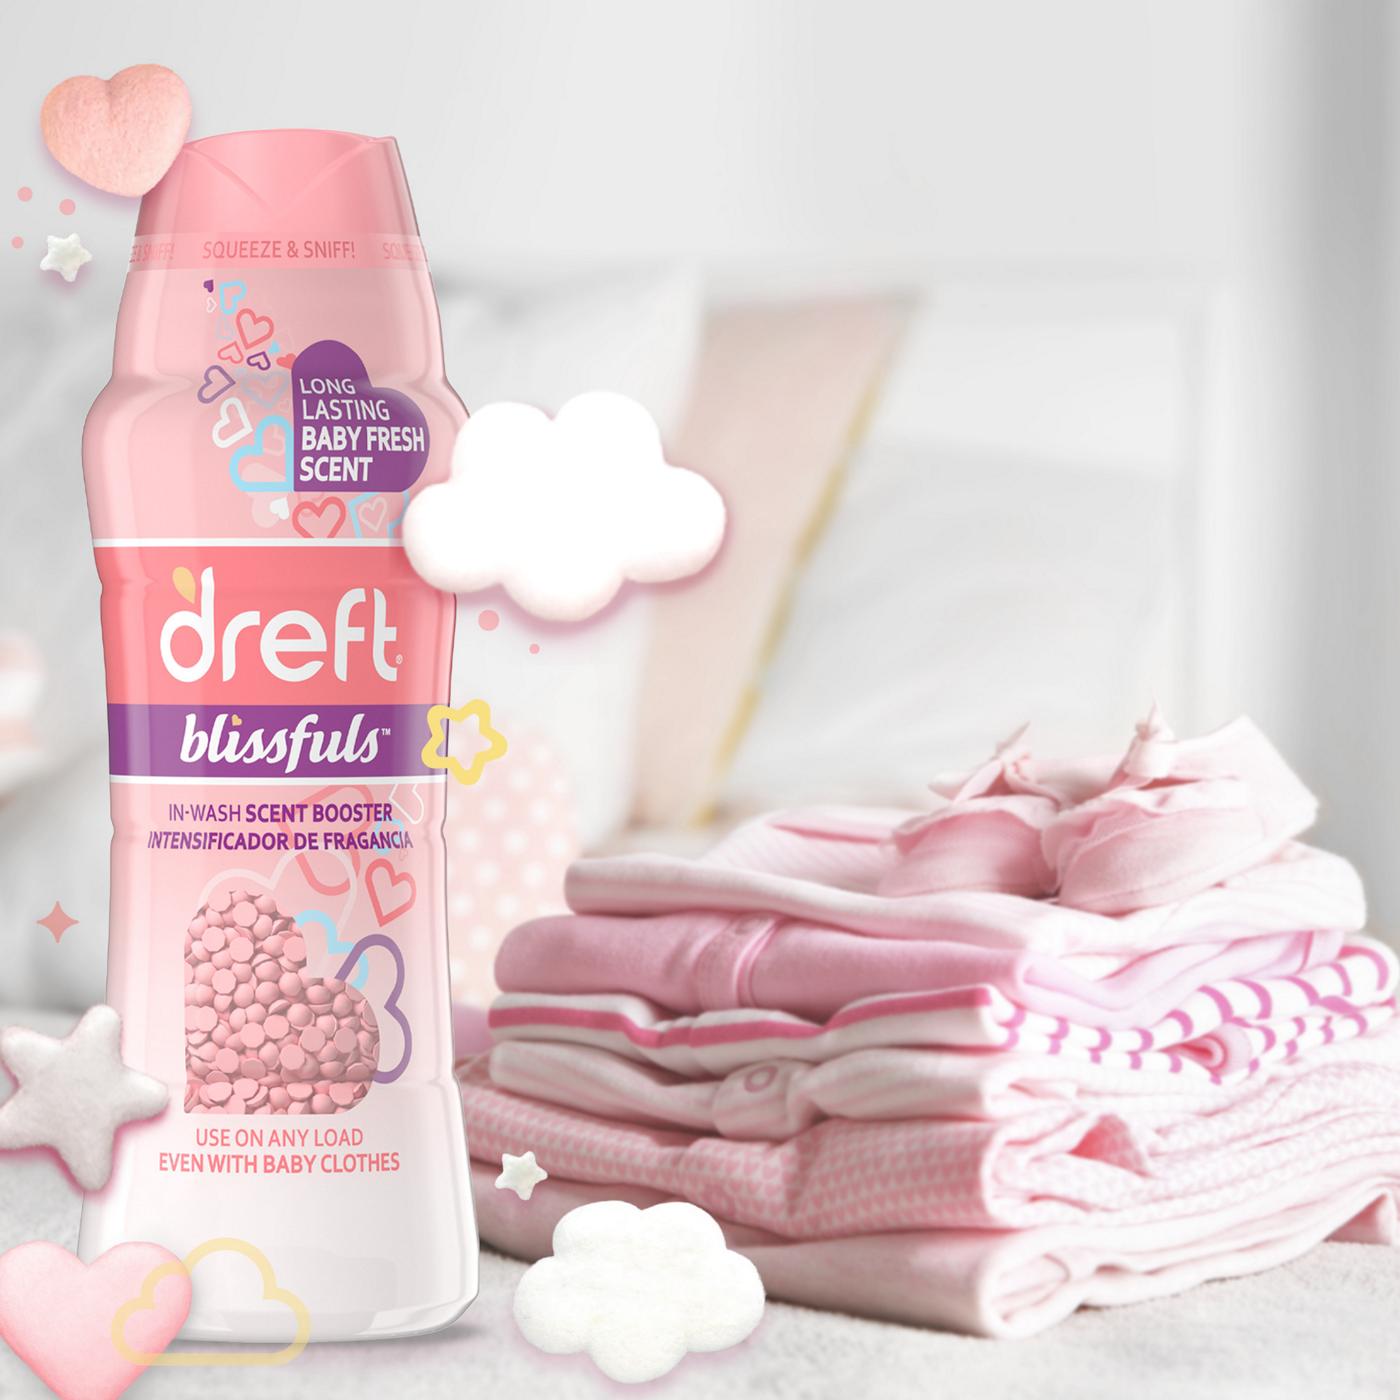 Dreft Blissfuls Baby Fresh In-Wash Scent Booster; image 2 of 3